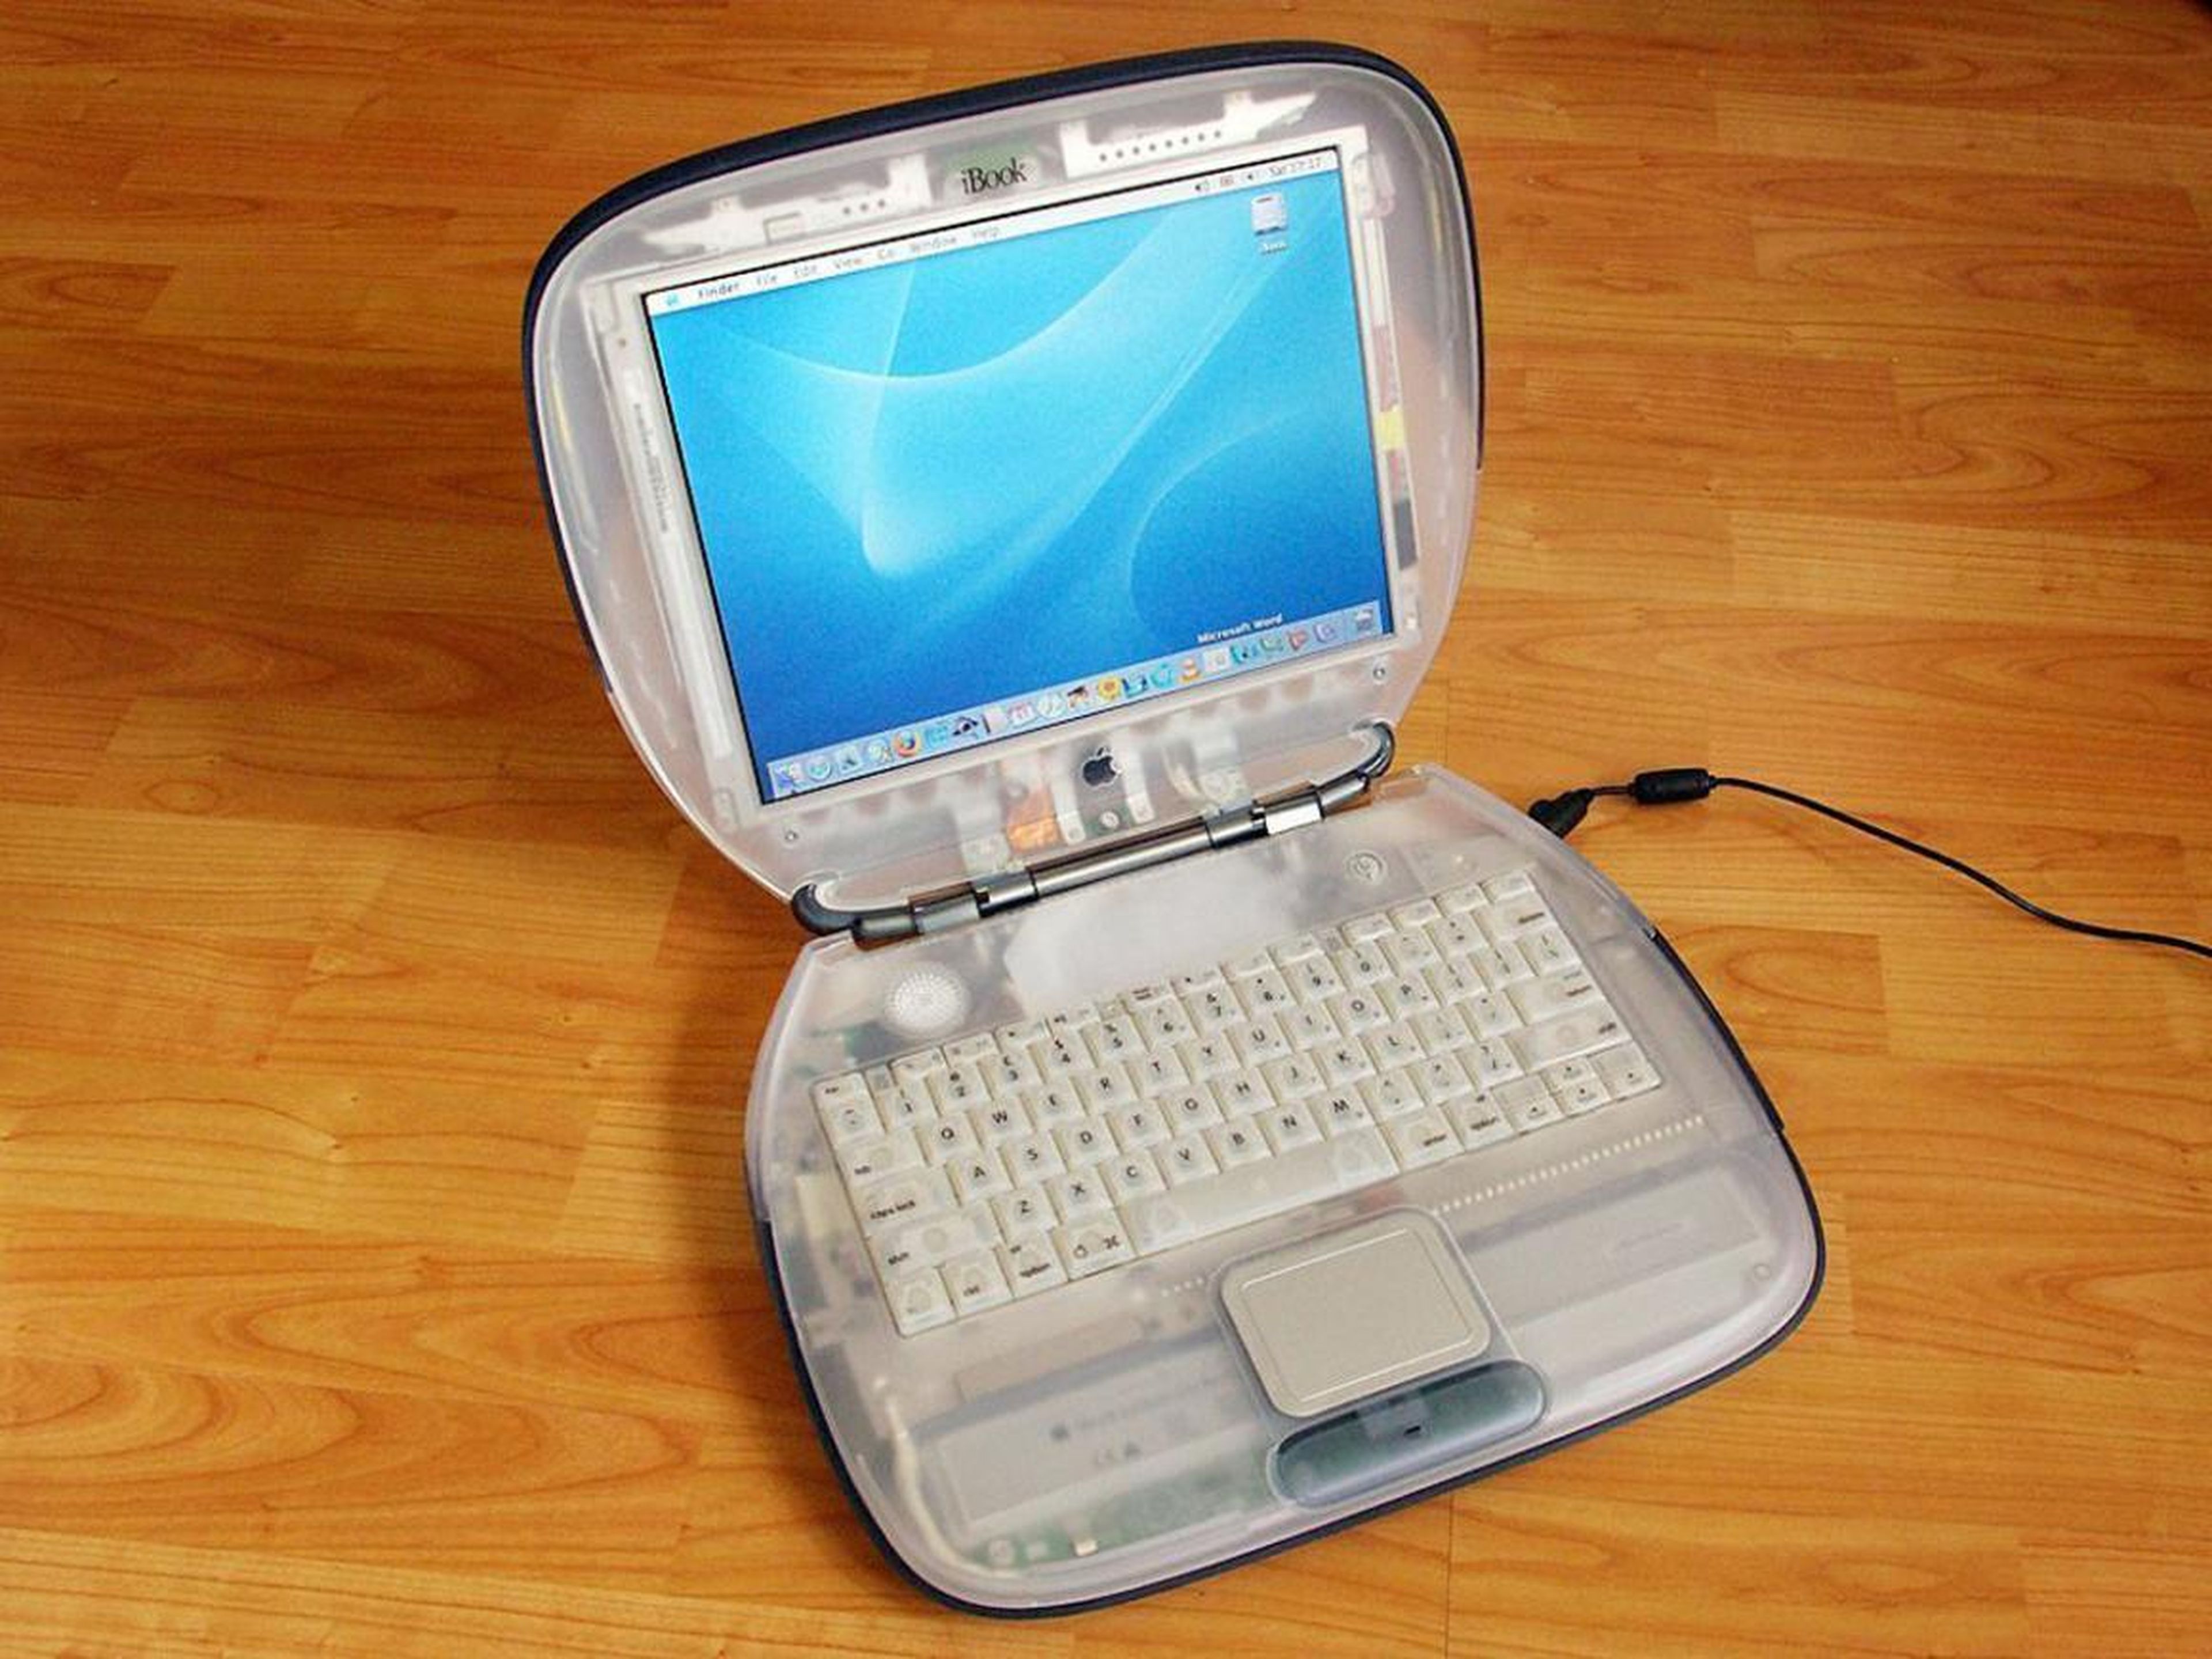 The naming scheme would stick around. In 1999, Apple introduced the "iBook," a funky machine that tried to replicate the iMac's success as an entry-level laptop.